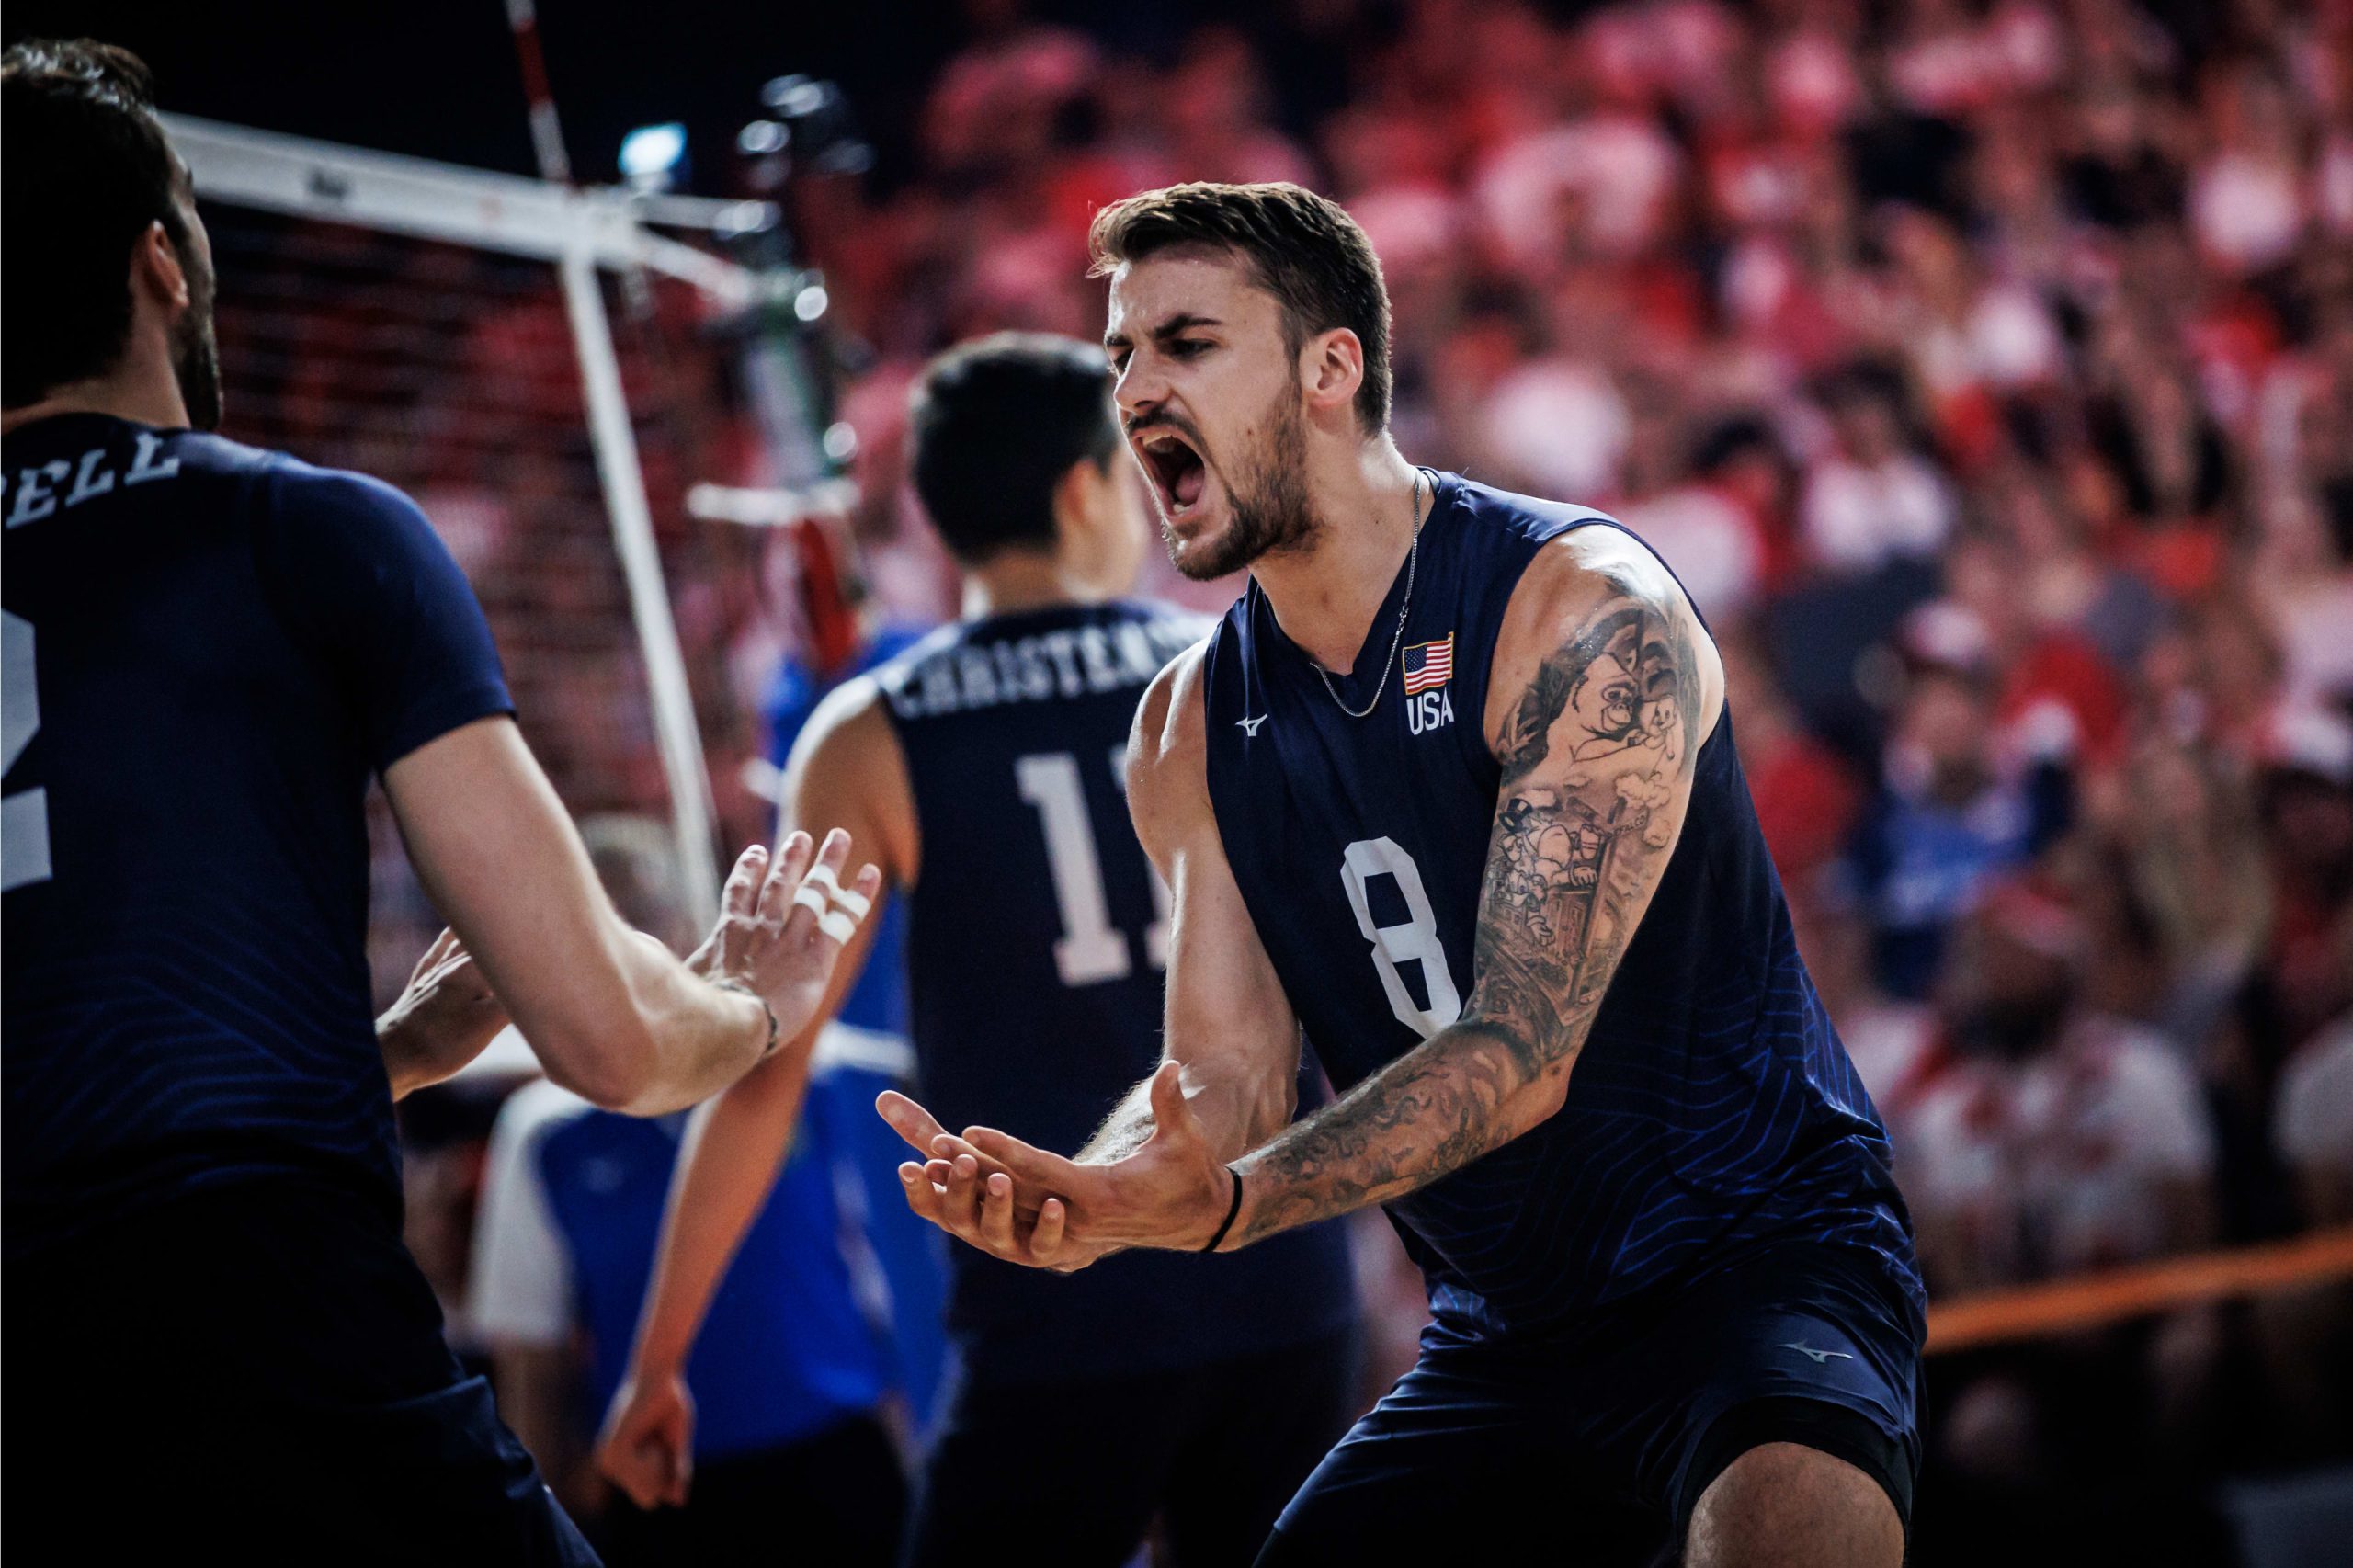 USA sweep Poland and get one step closer to the top